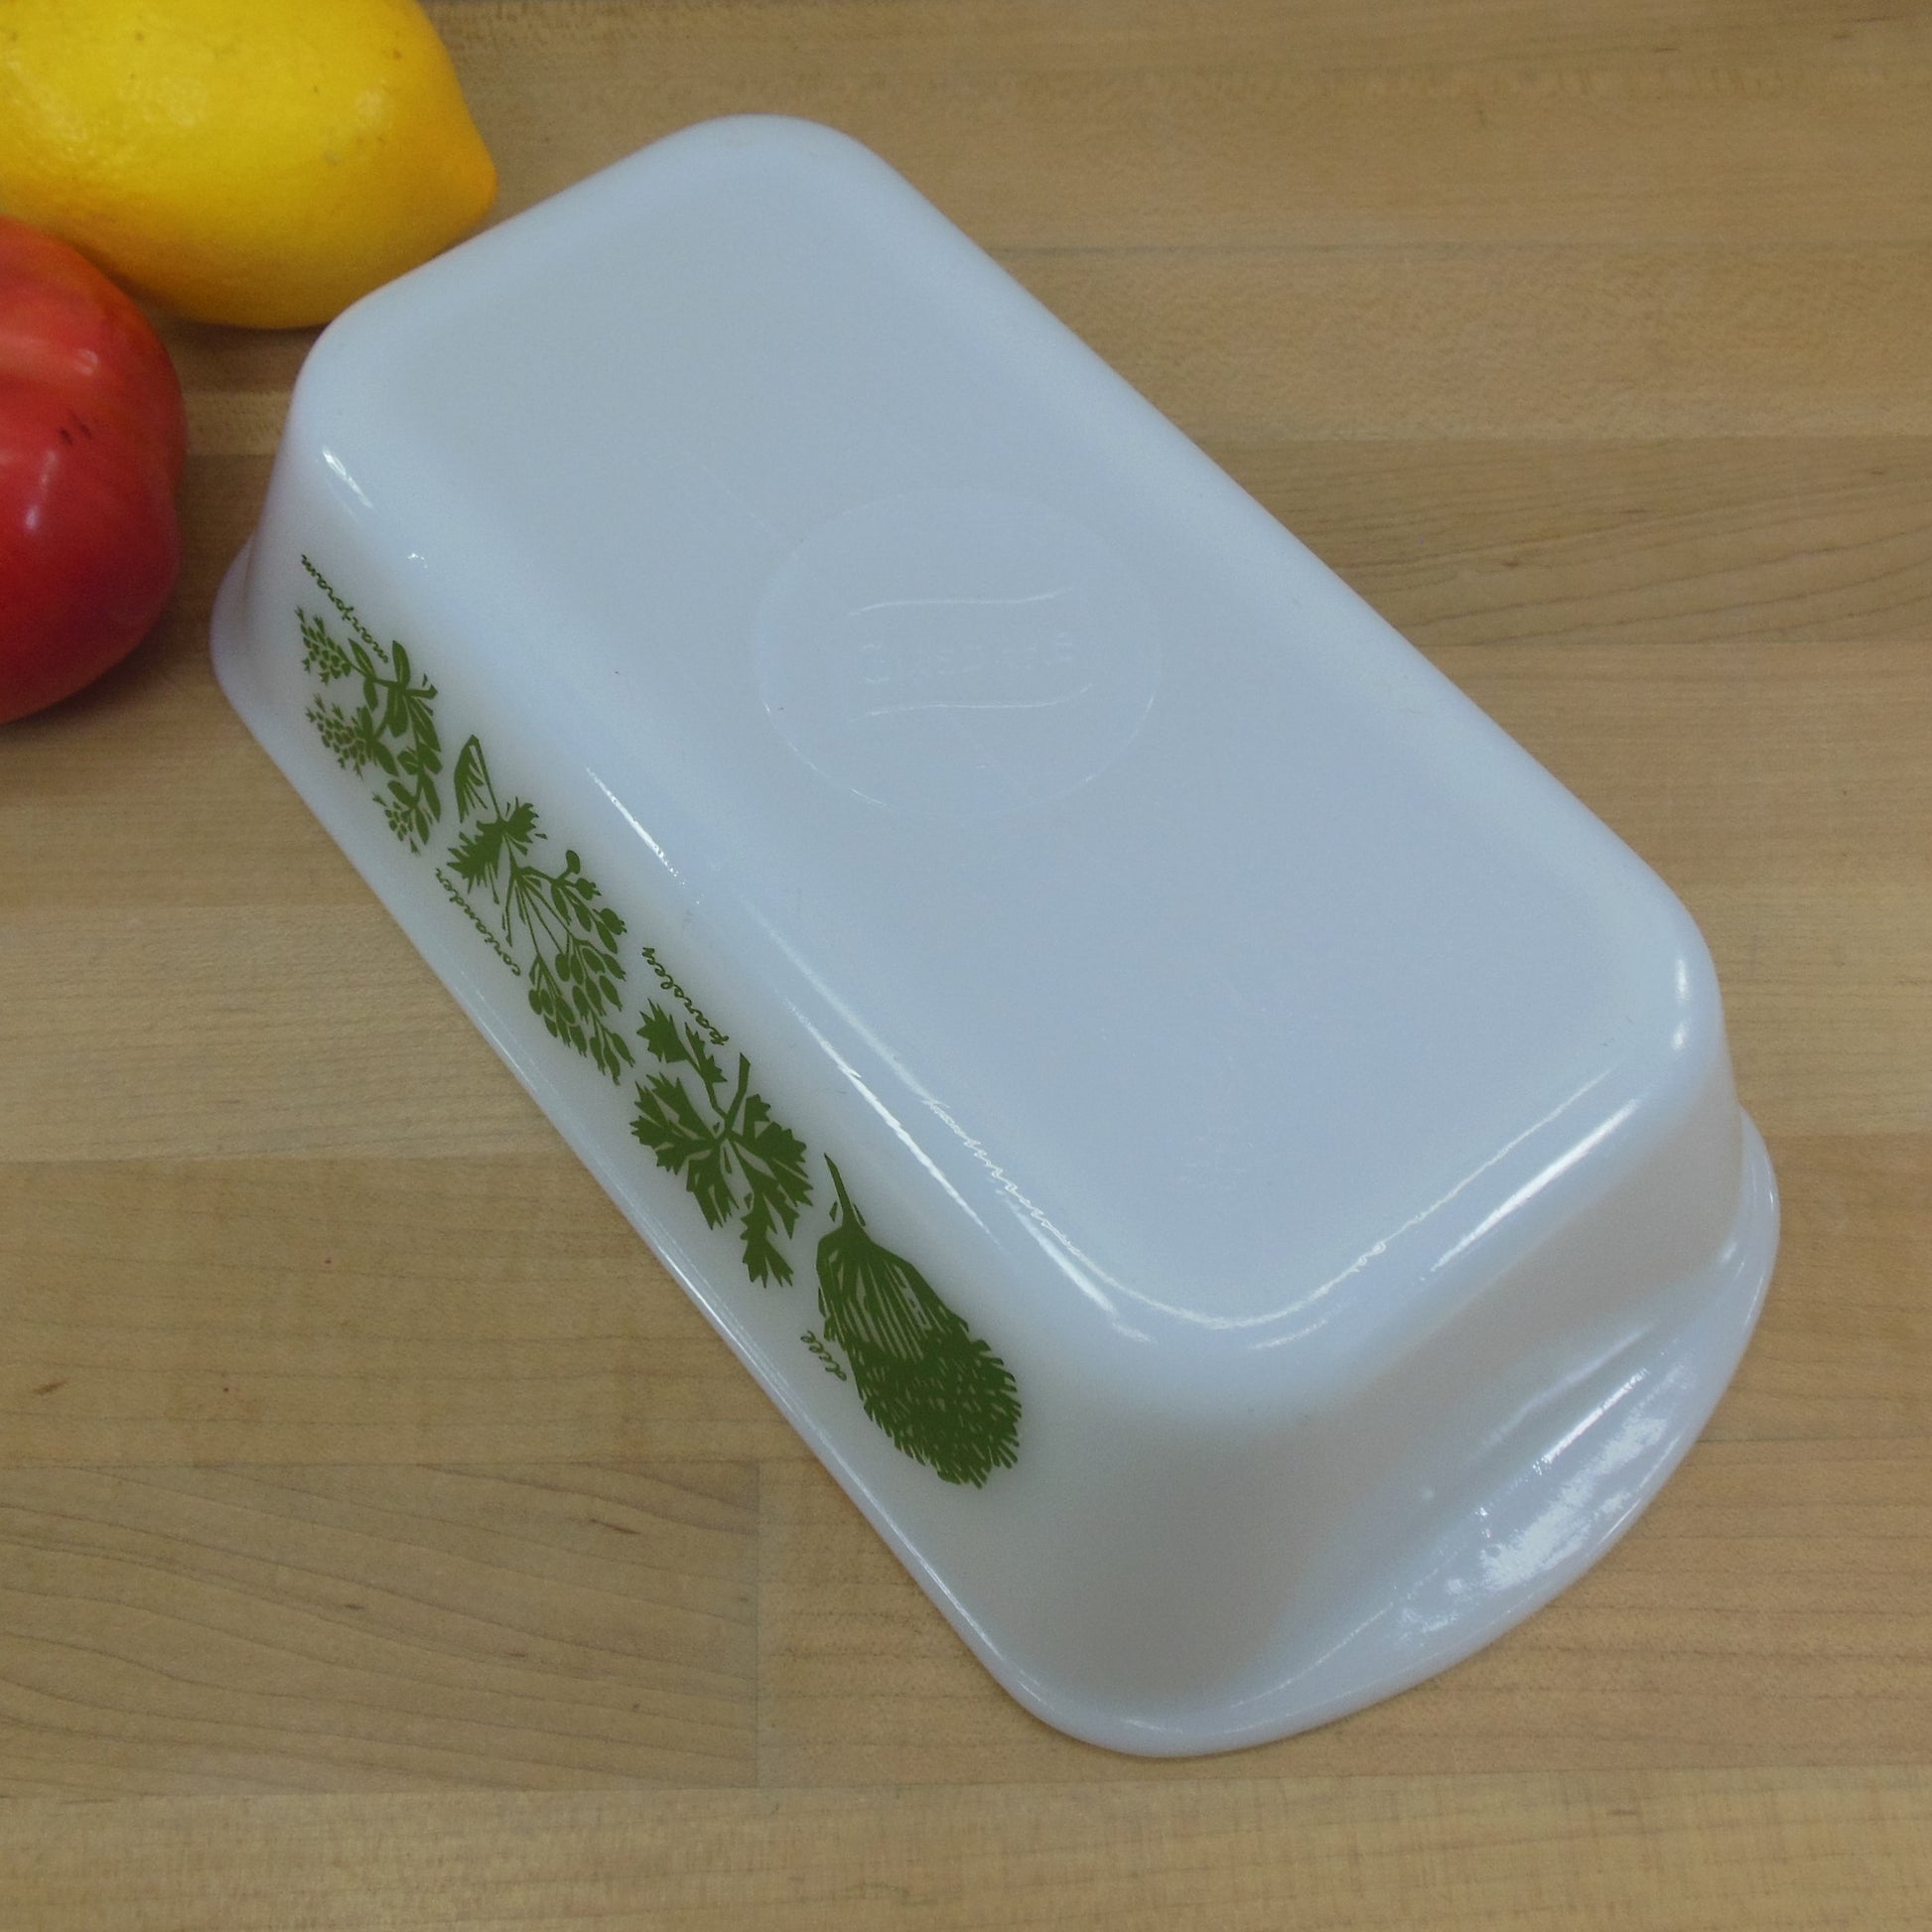 Glasbake USA Green Herbs Meat Loaf Bread Pan Dish Green White used